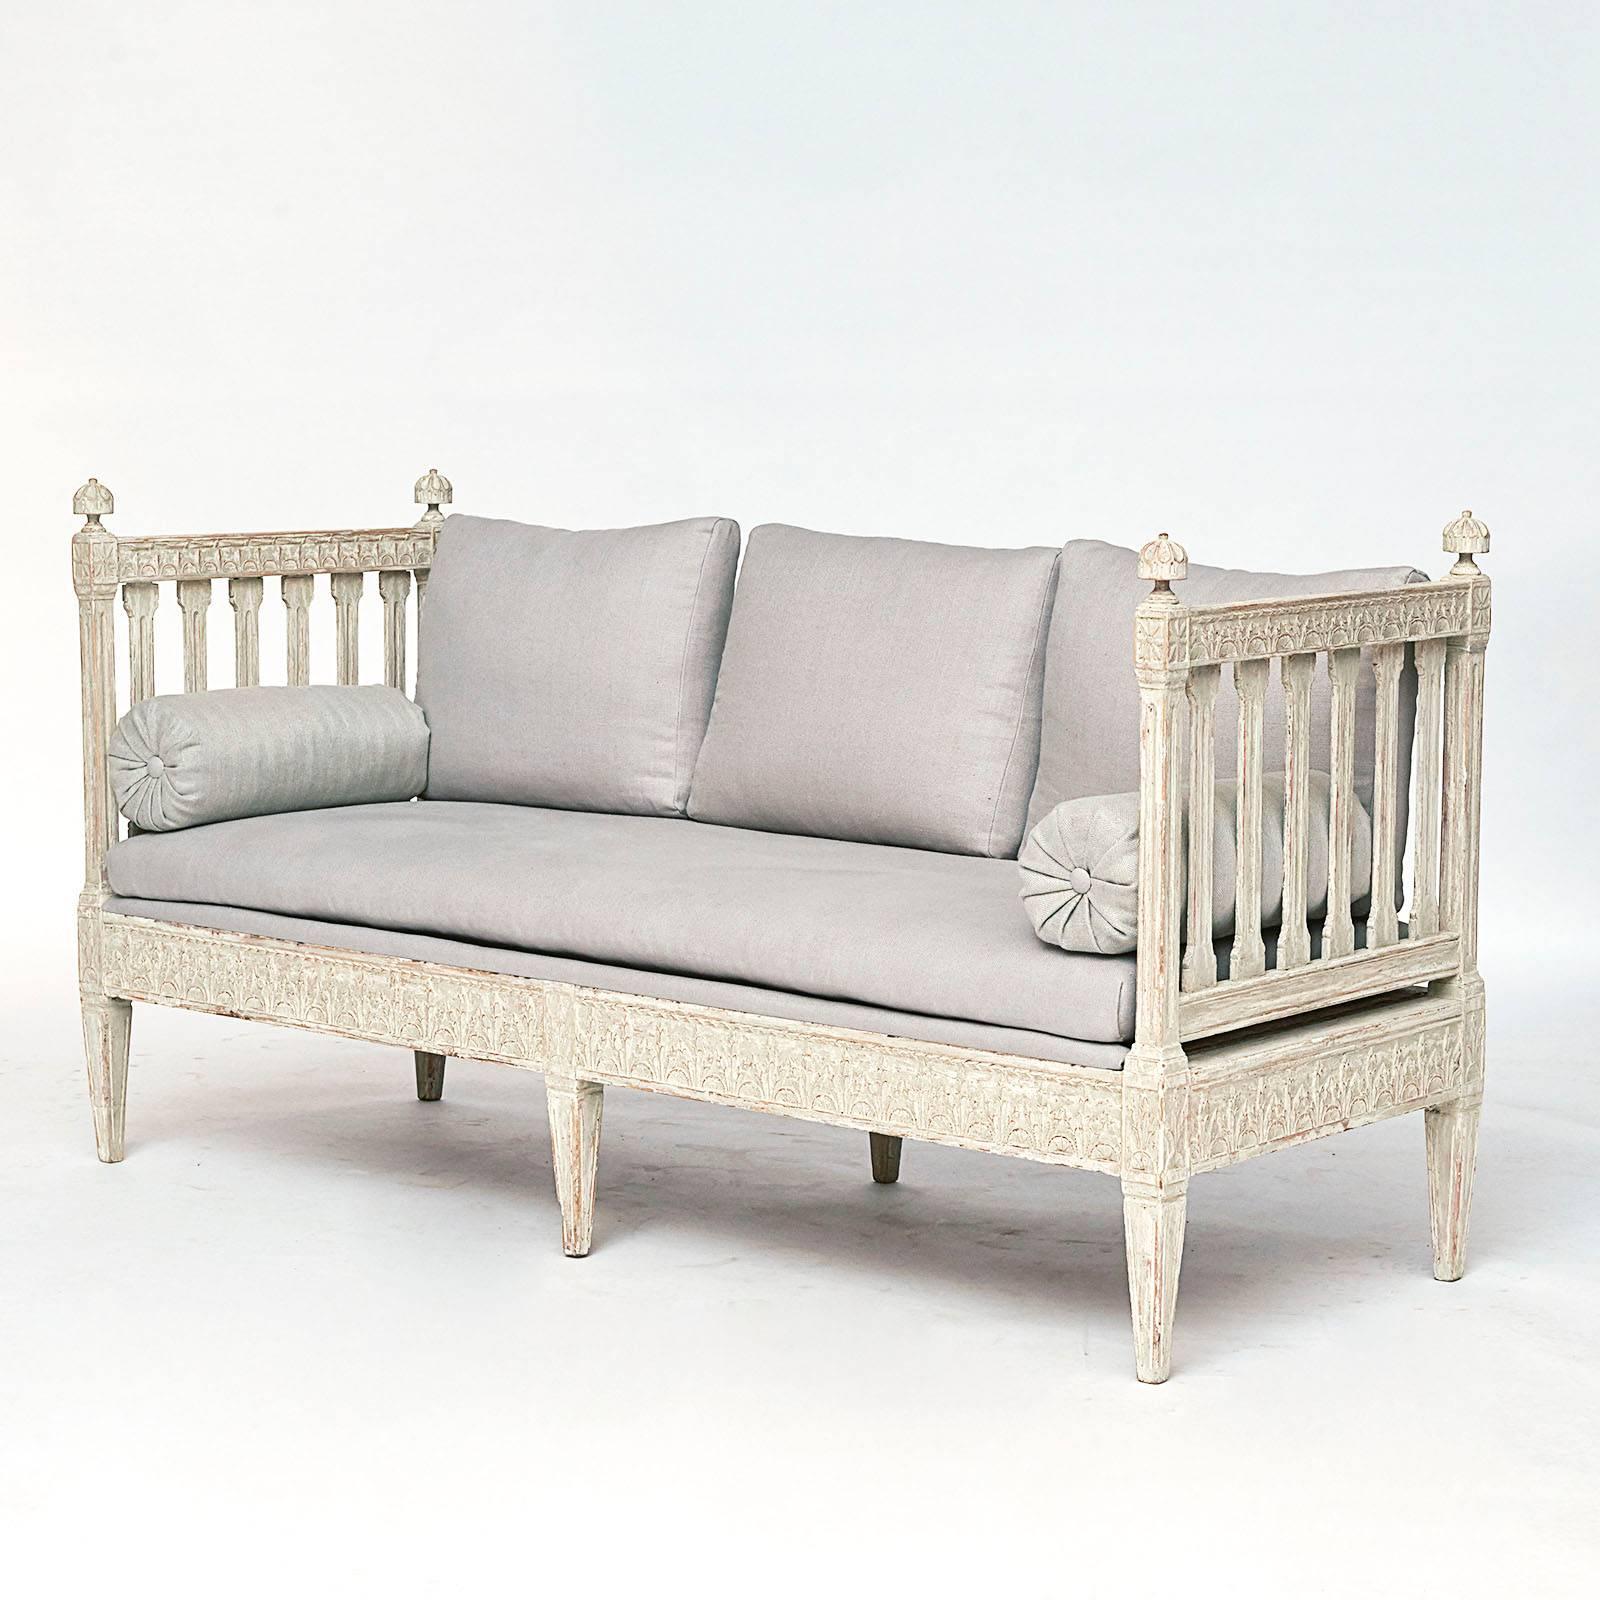 A Swedish late Gustavian painted bench, late 18th-early 19th century, the loose cushion seat and back between slat form sides with leaf carvings and headed with turned finials, a leaf carved frieze raised on square tapered legs. Re-upholstered in